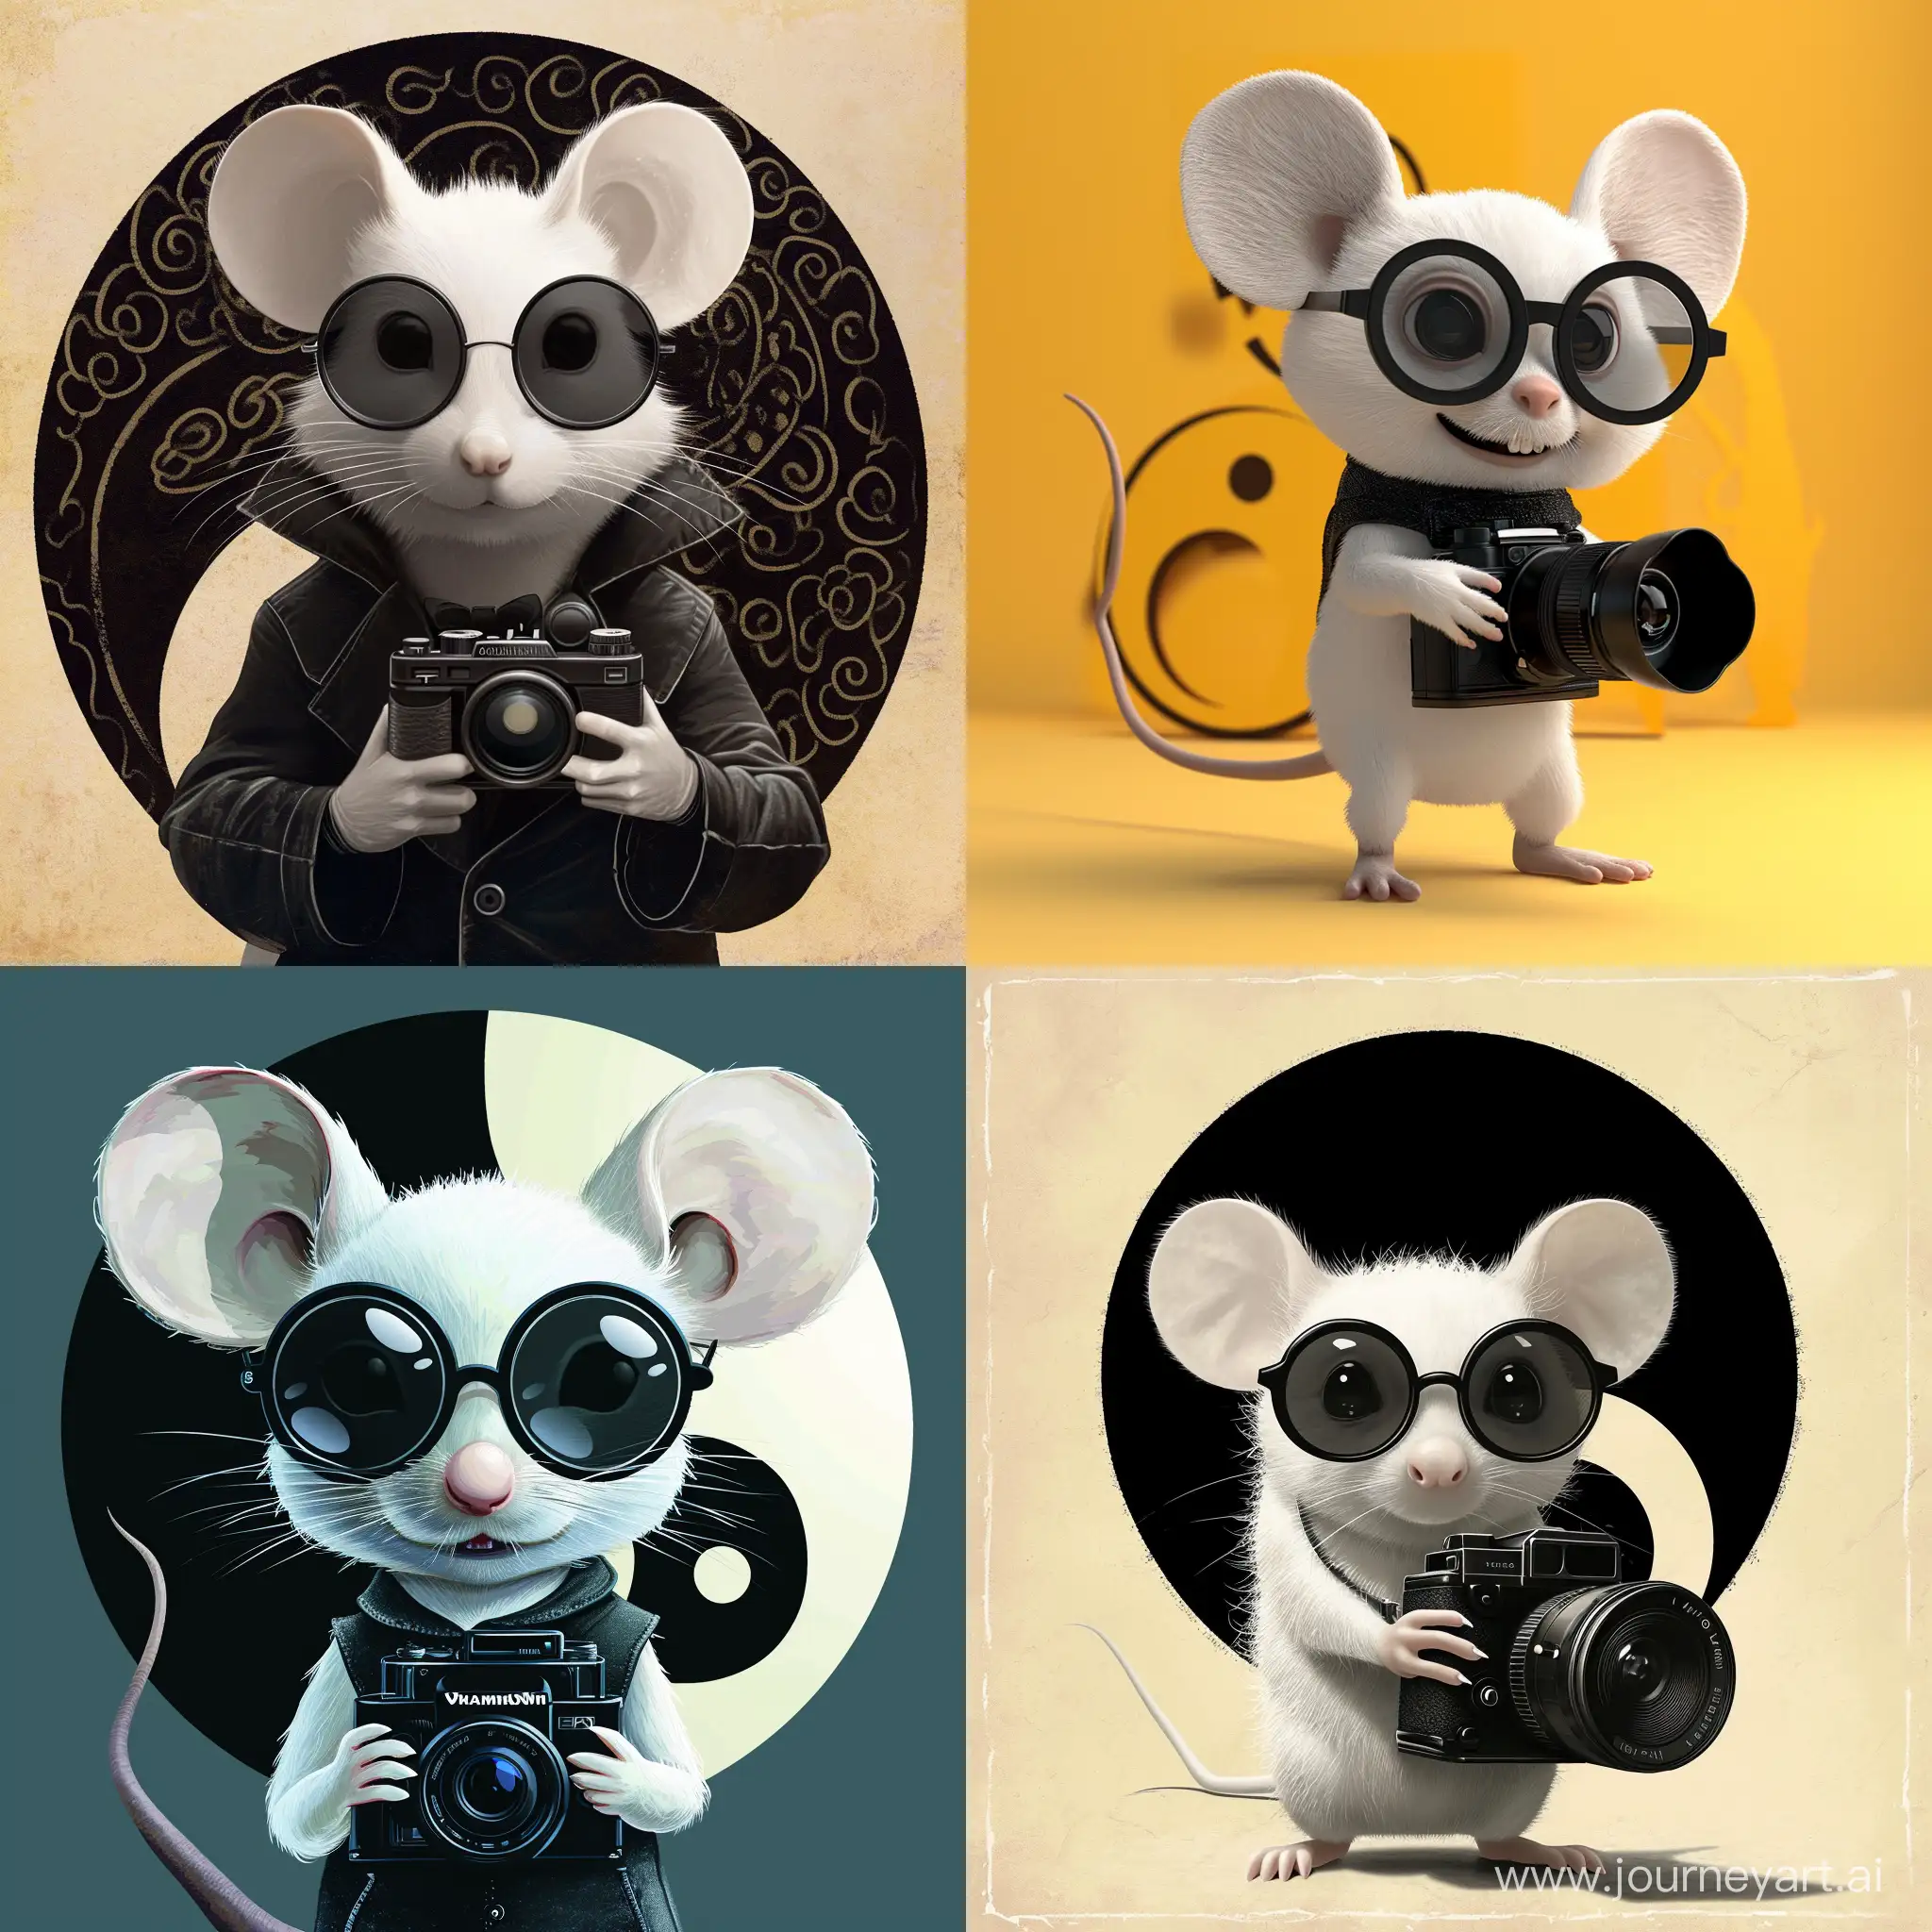 avatar picture of white Mouse with round black glasses and black cylinder holding digital camera

Style: realistic but mythical
Background: Yin Yang


